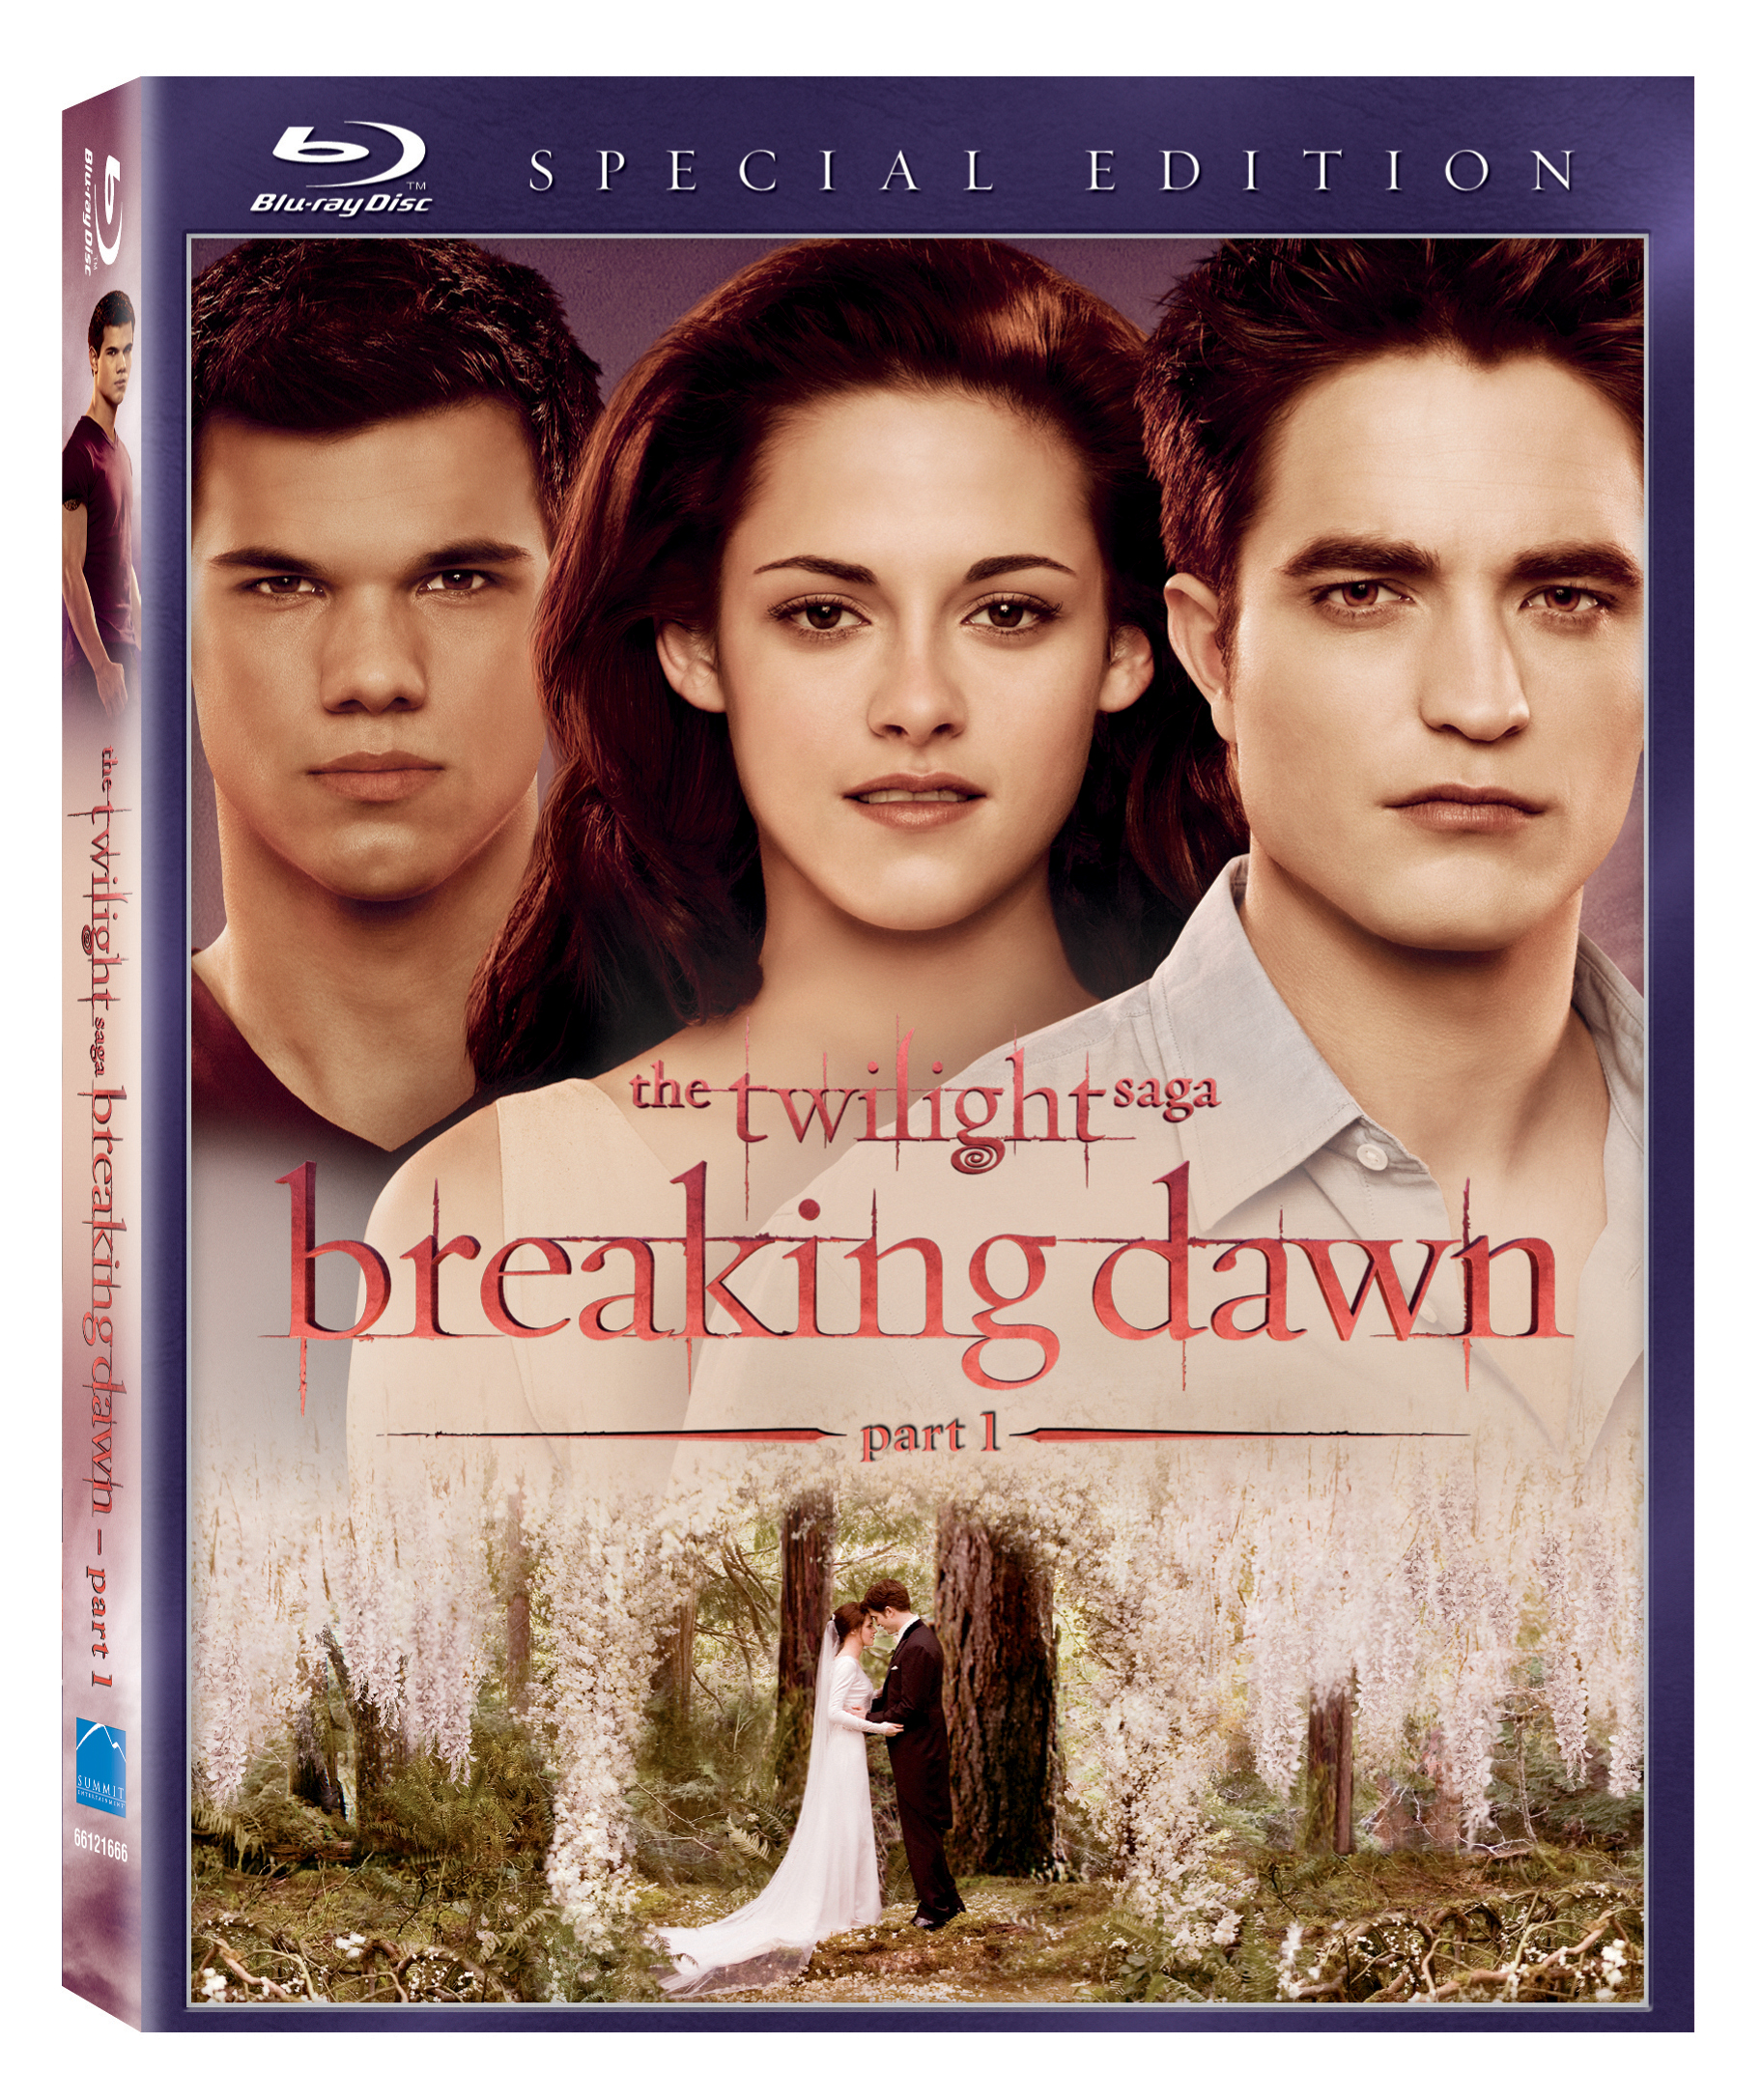 Blu Ray Review The Twilight Saga Breaking Dawn Part 1 Out Now On Special Edition Blu Ray